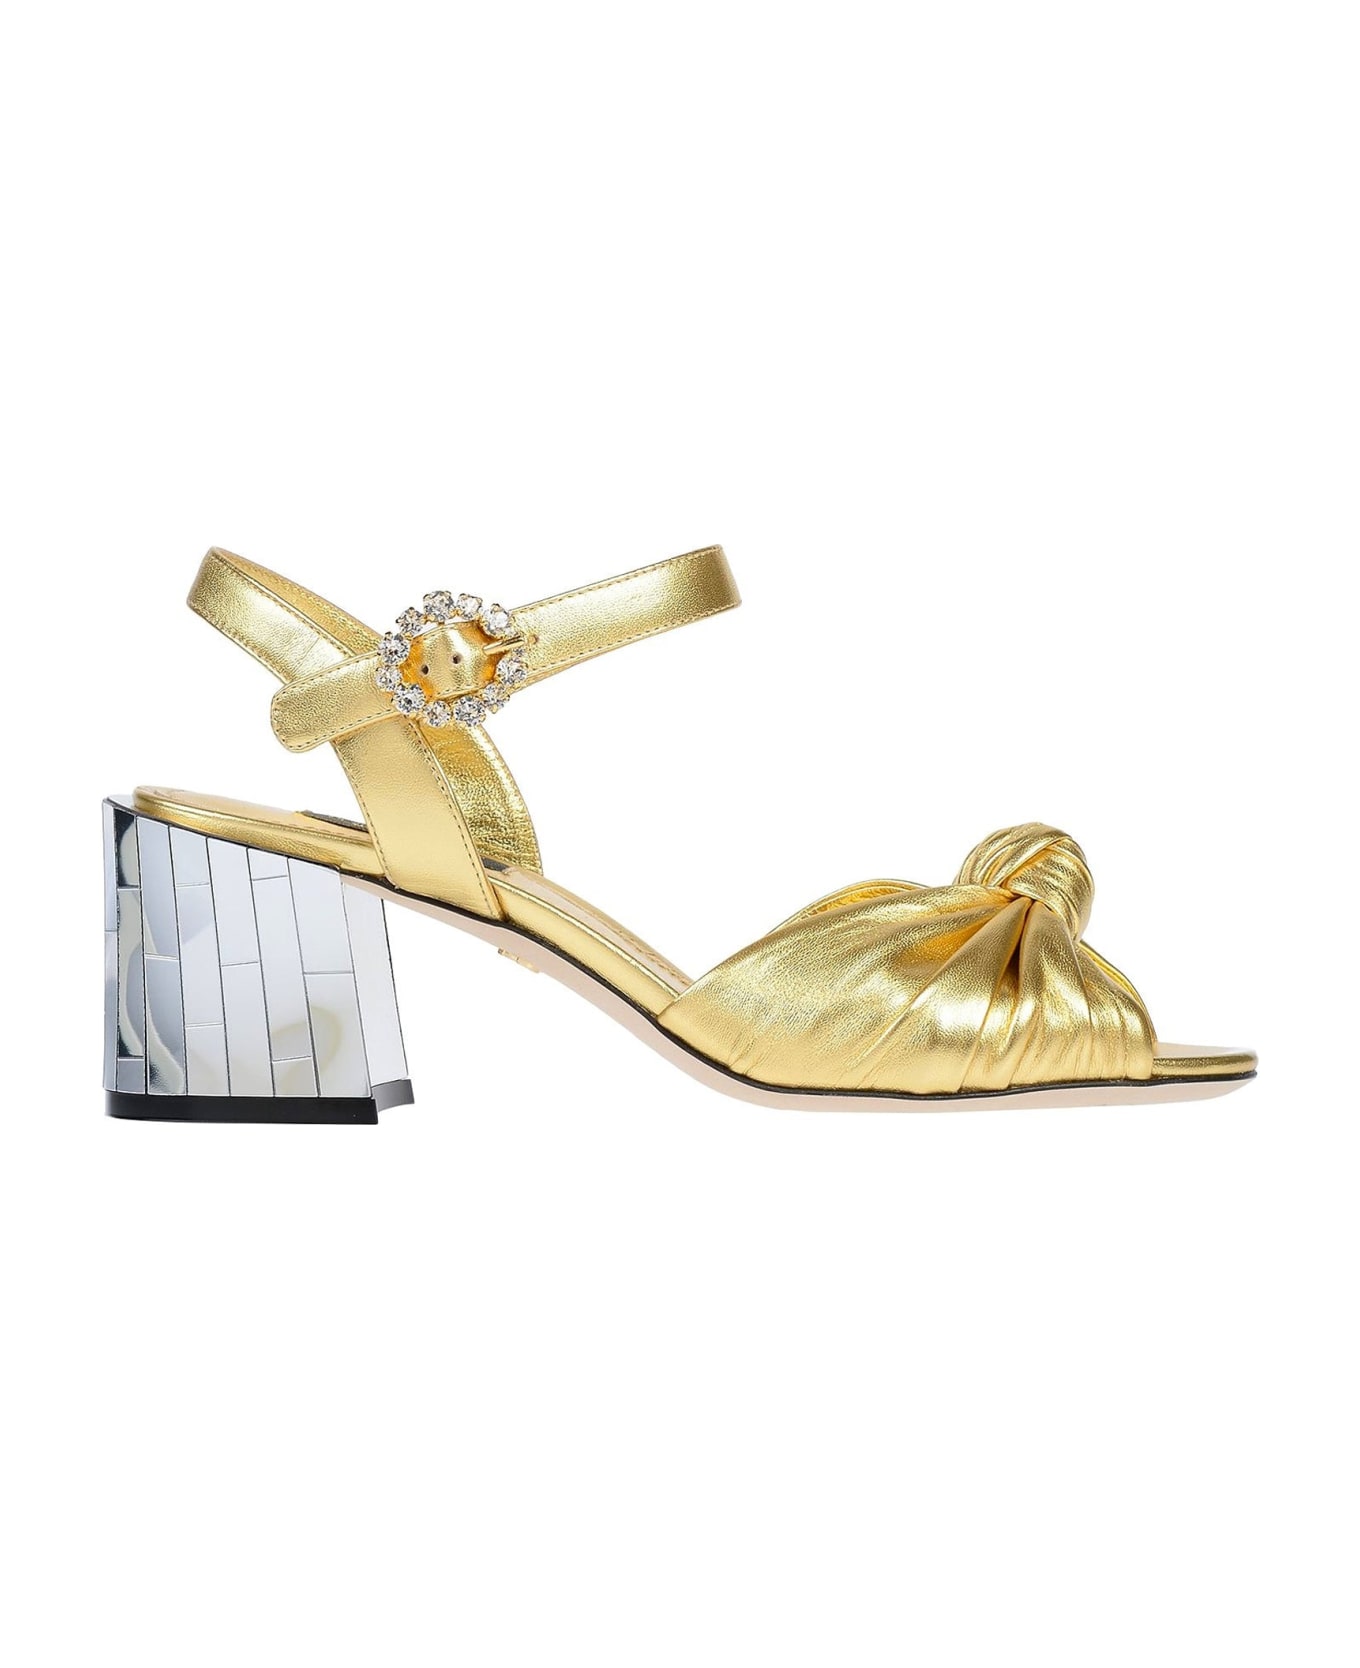 Dolce & Gabbana Keira Leather Sandals - Gold